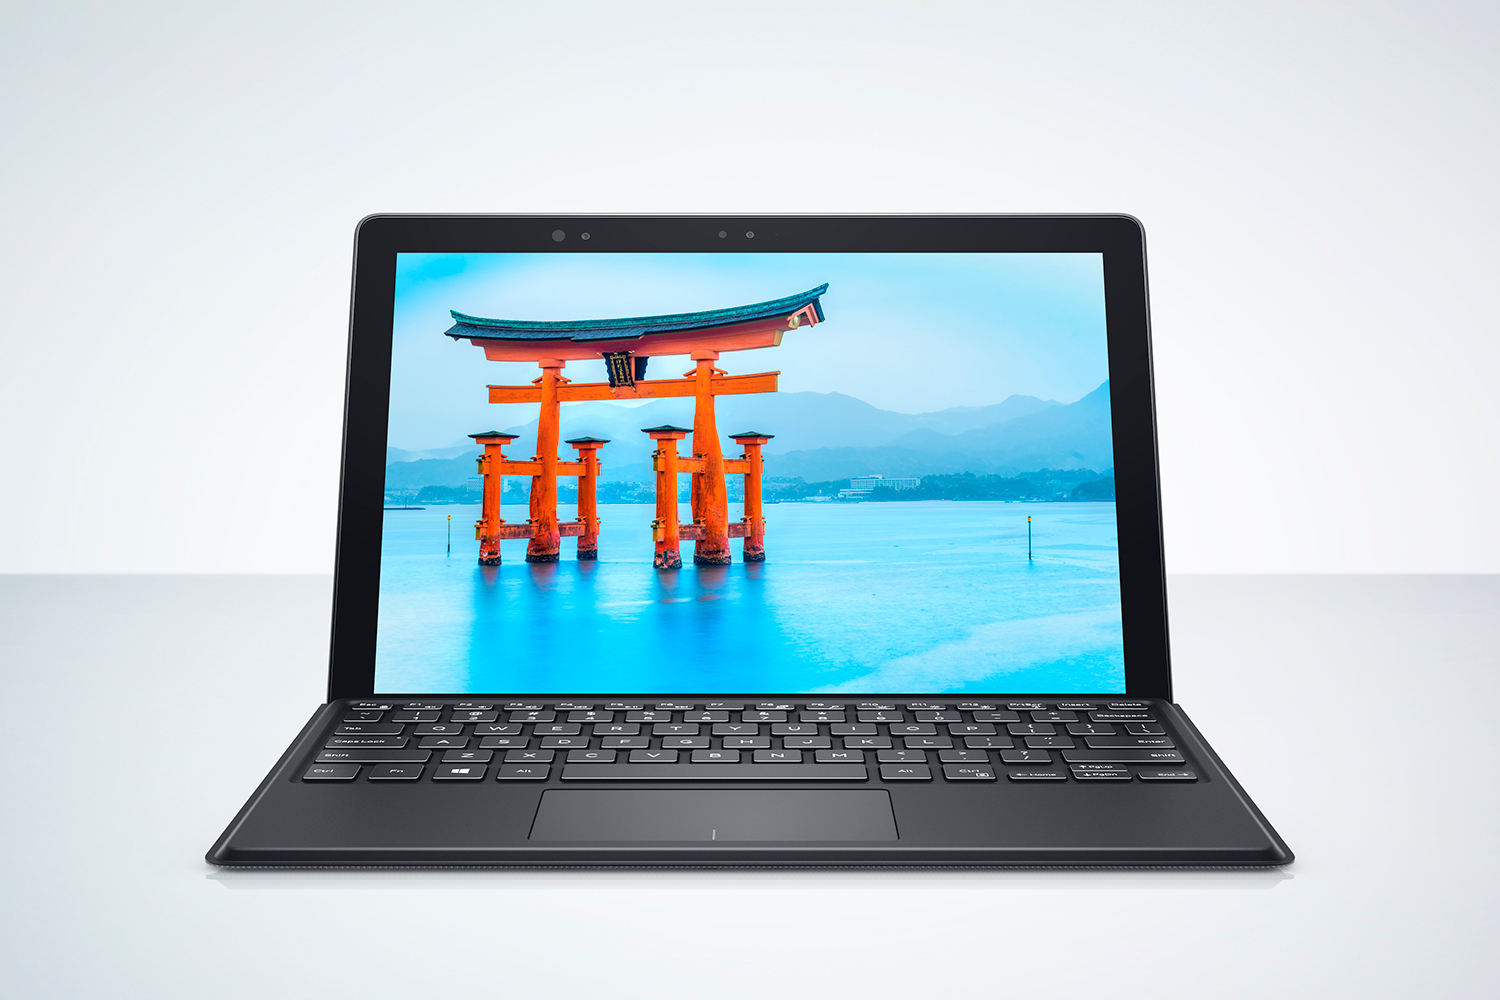 Dell's Latitude 5285 2-in-1 is a hybrid workhorse for users on the move